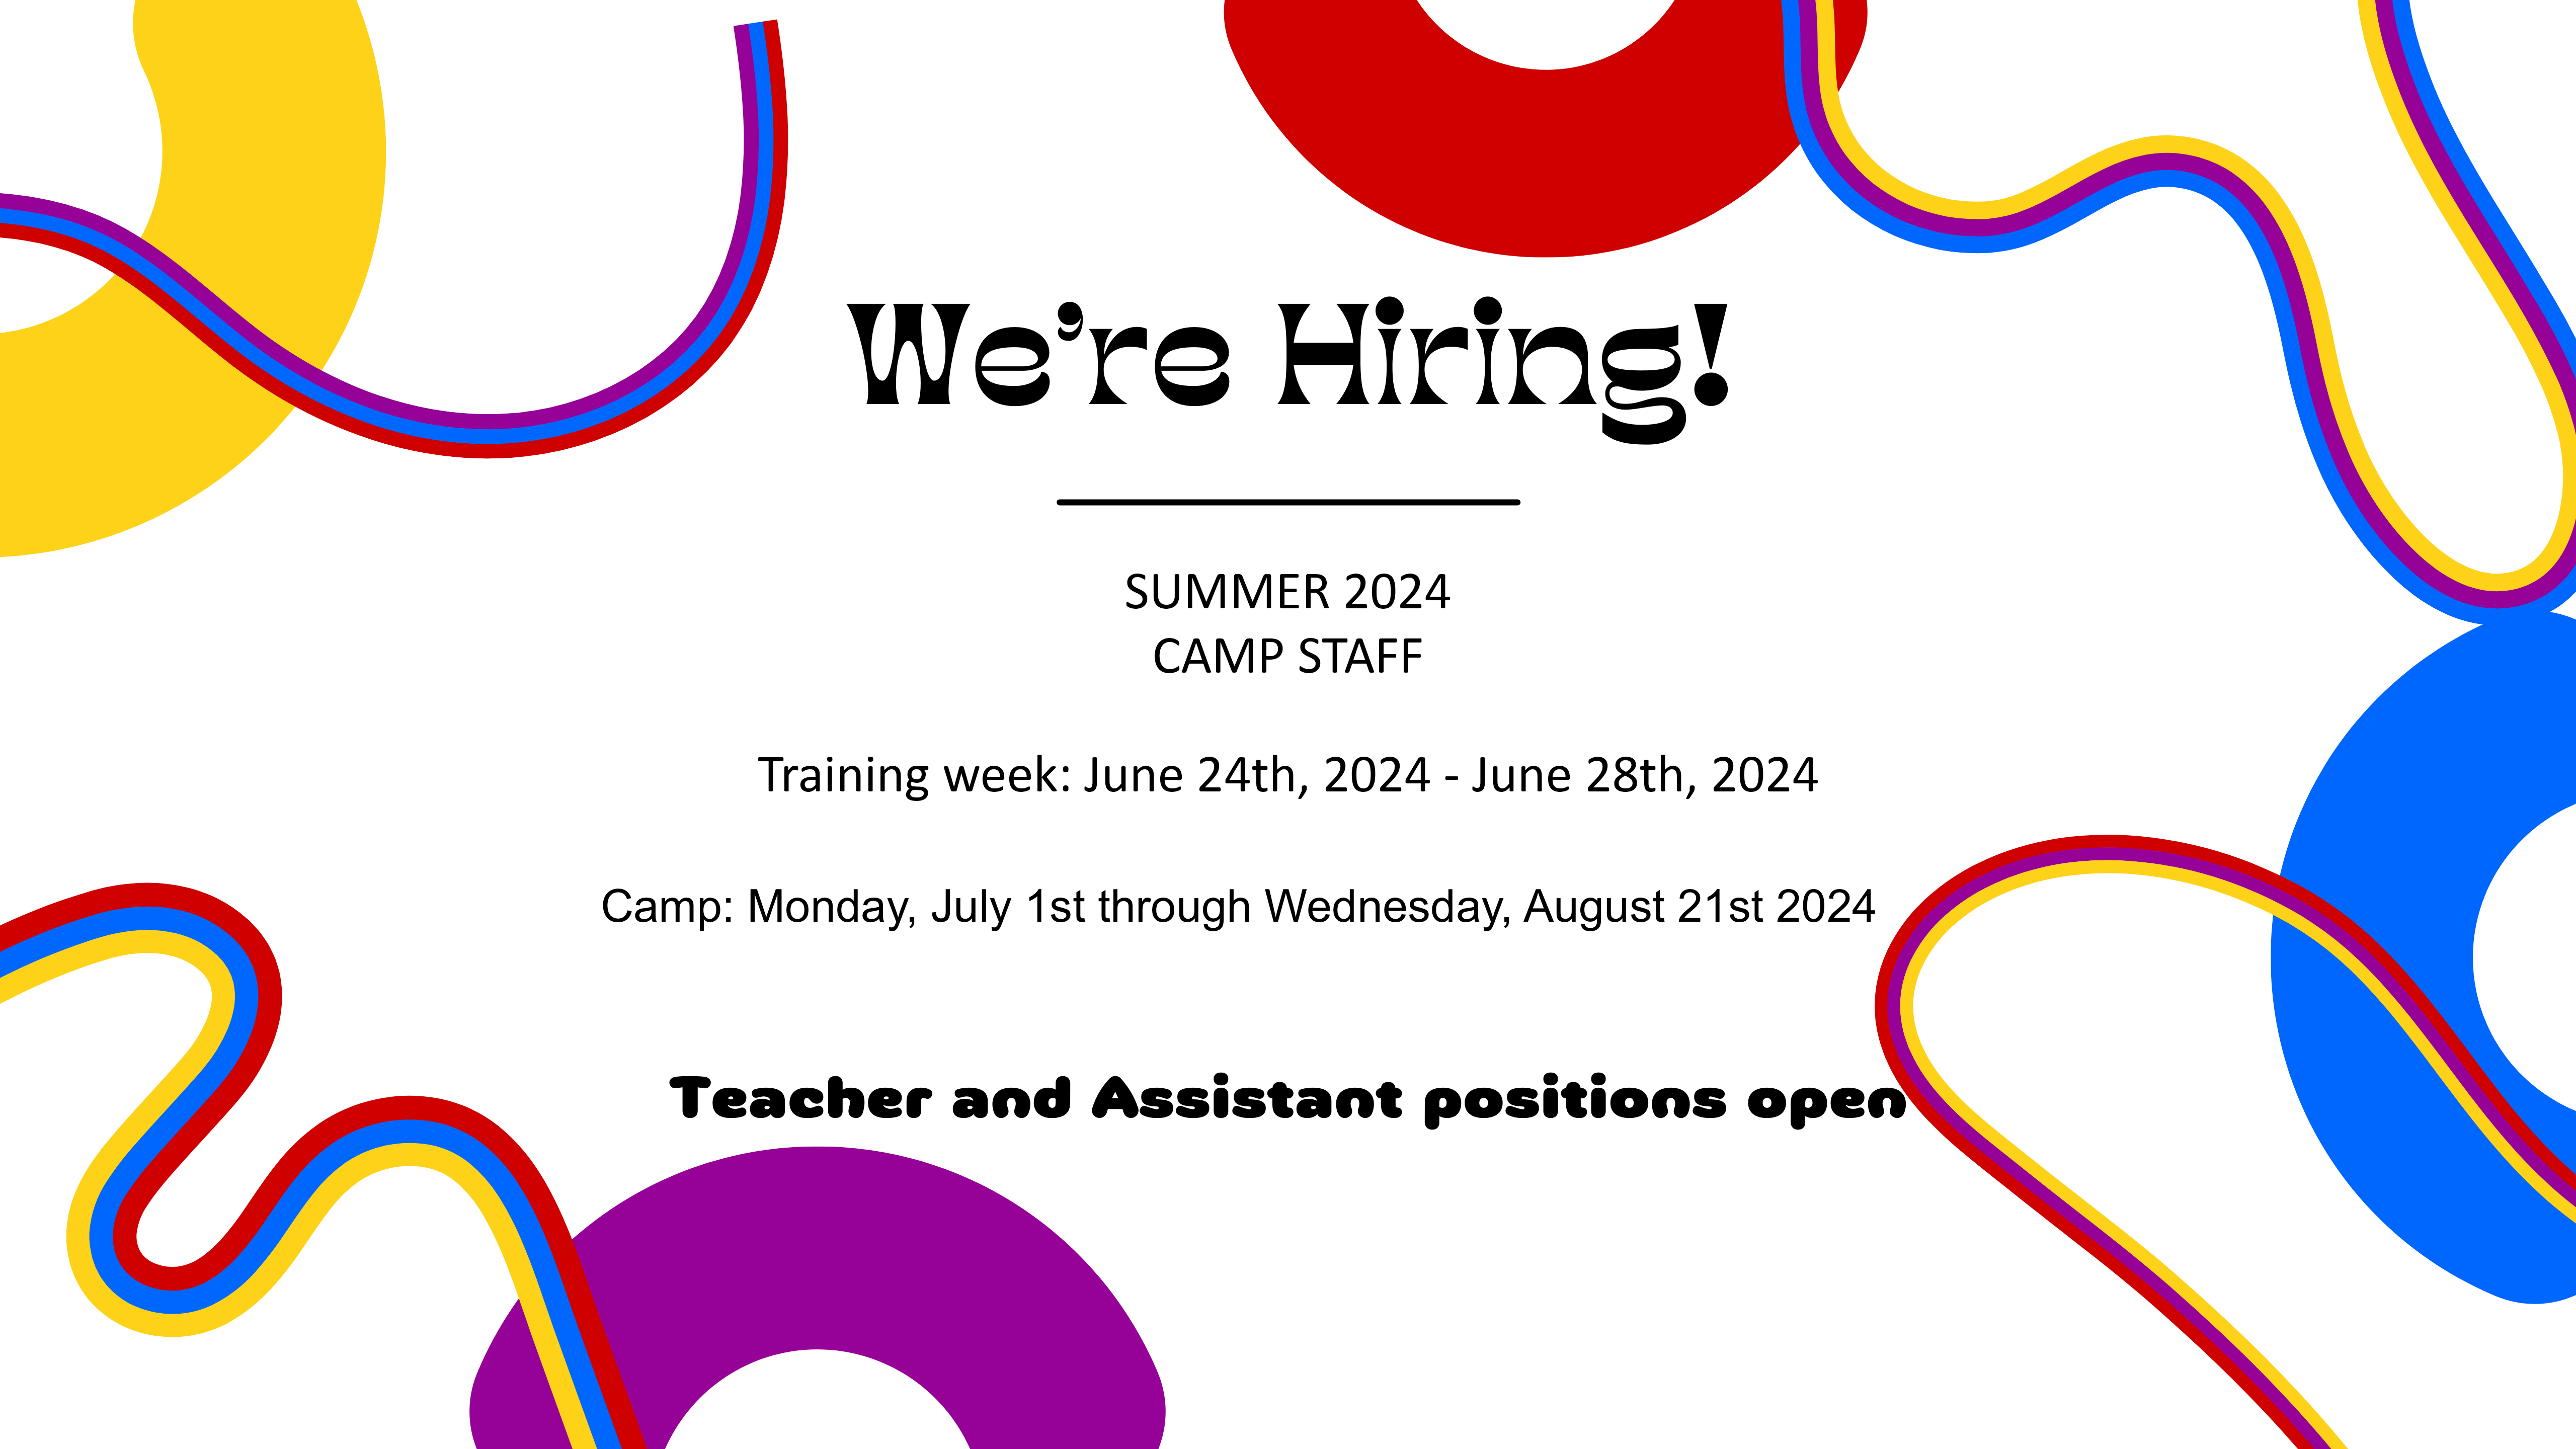 We're hiring for camp 2024